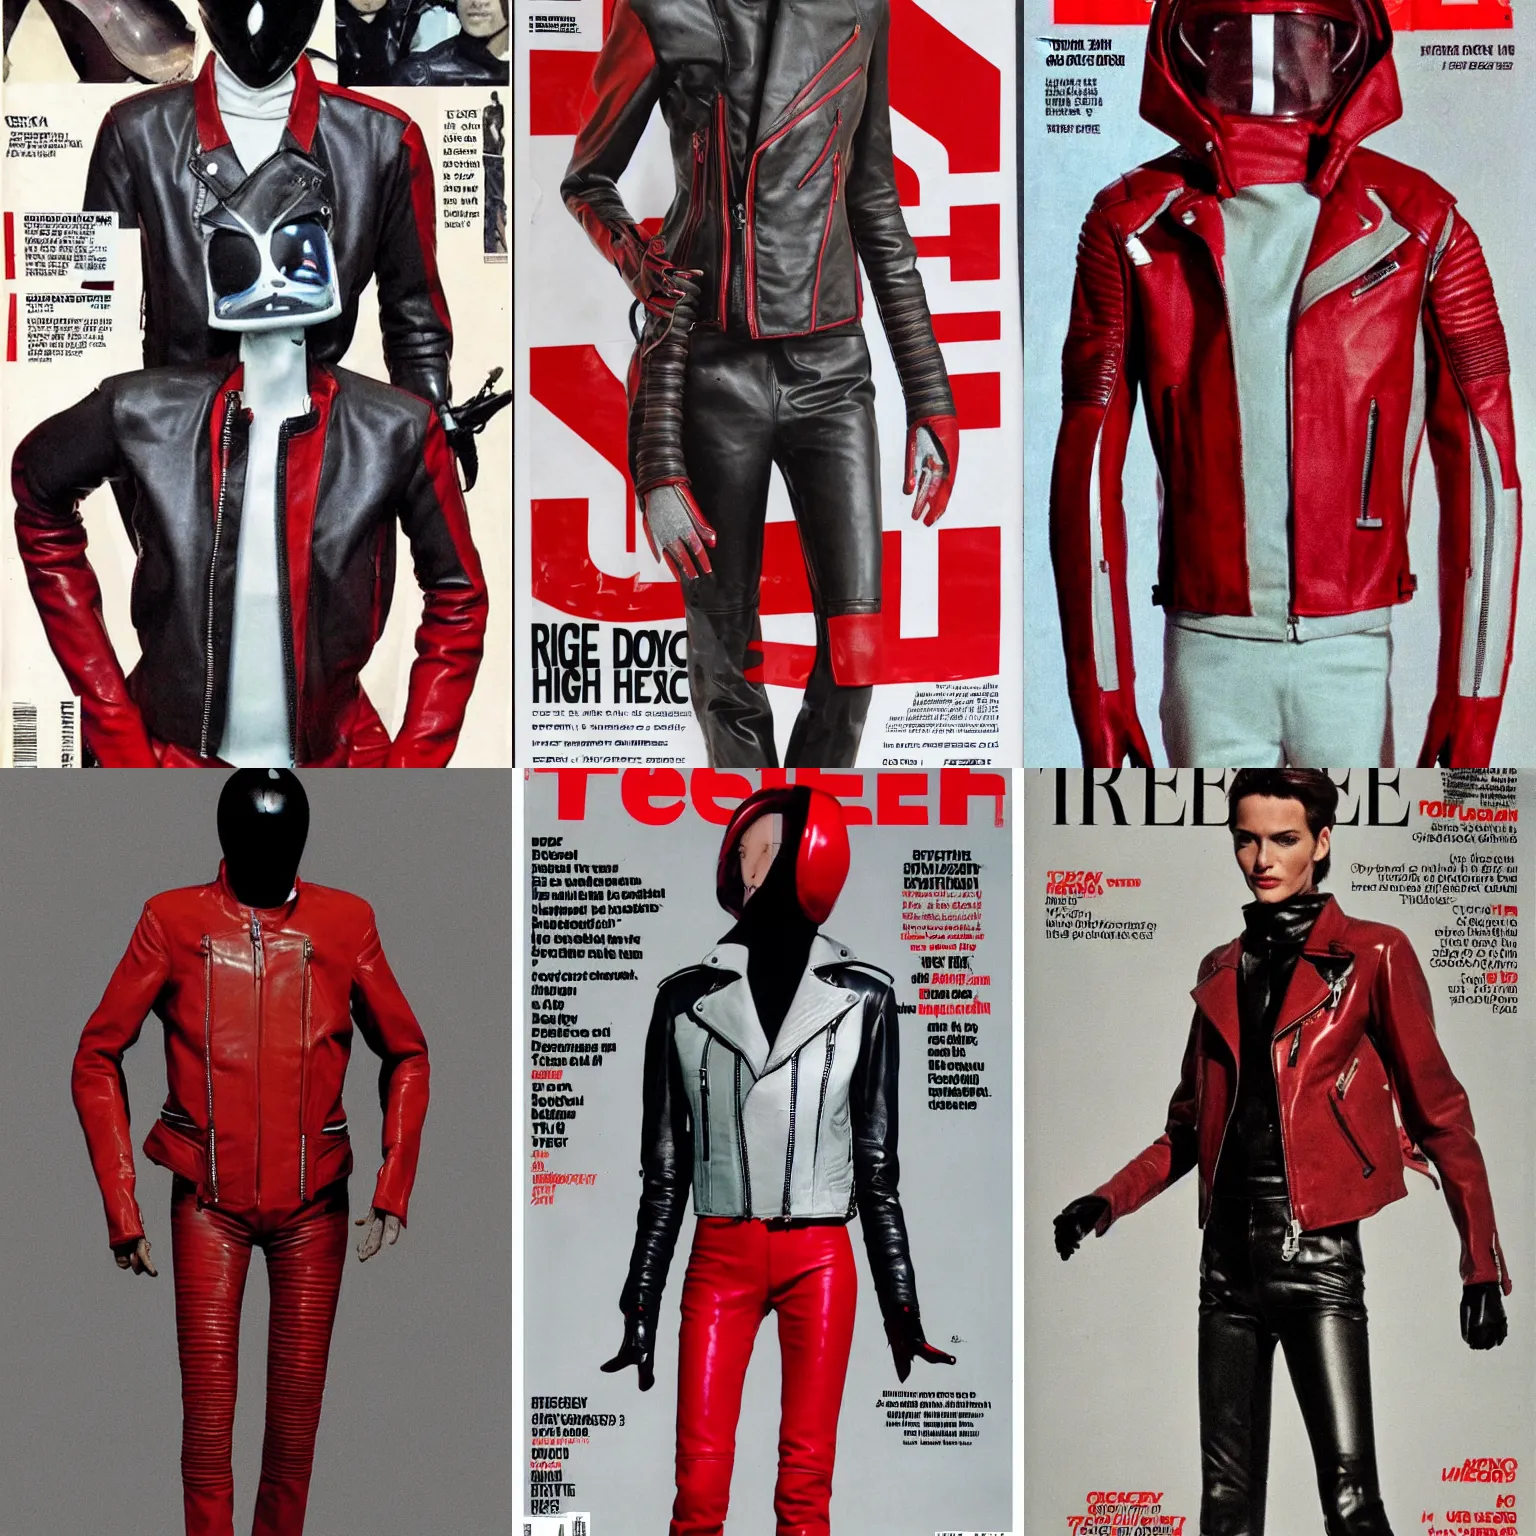 Prompt: sectoid, zeta reticulans, roswell greys, gray, wearing the red leather motorcycle jacket from thriller, high fashion magazine cover.